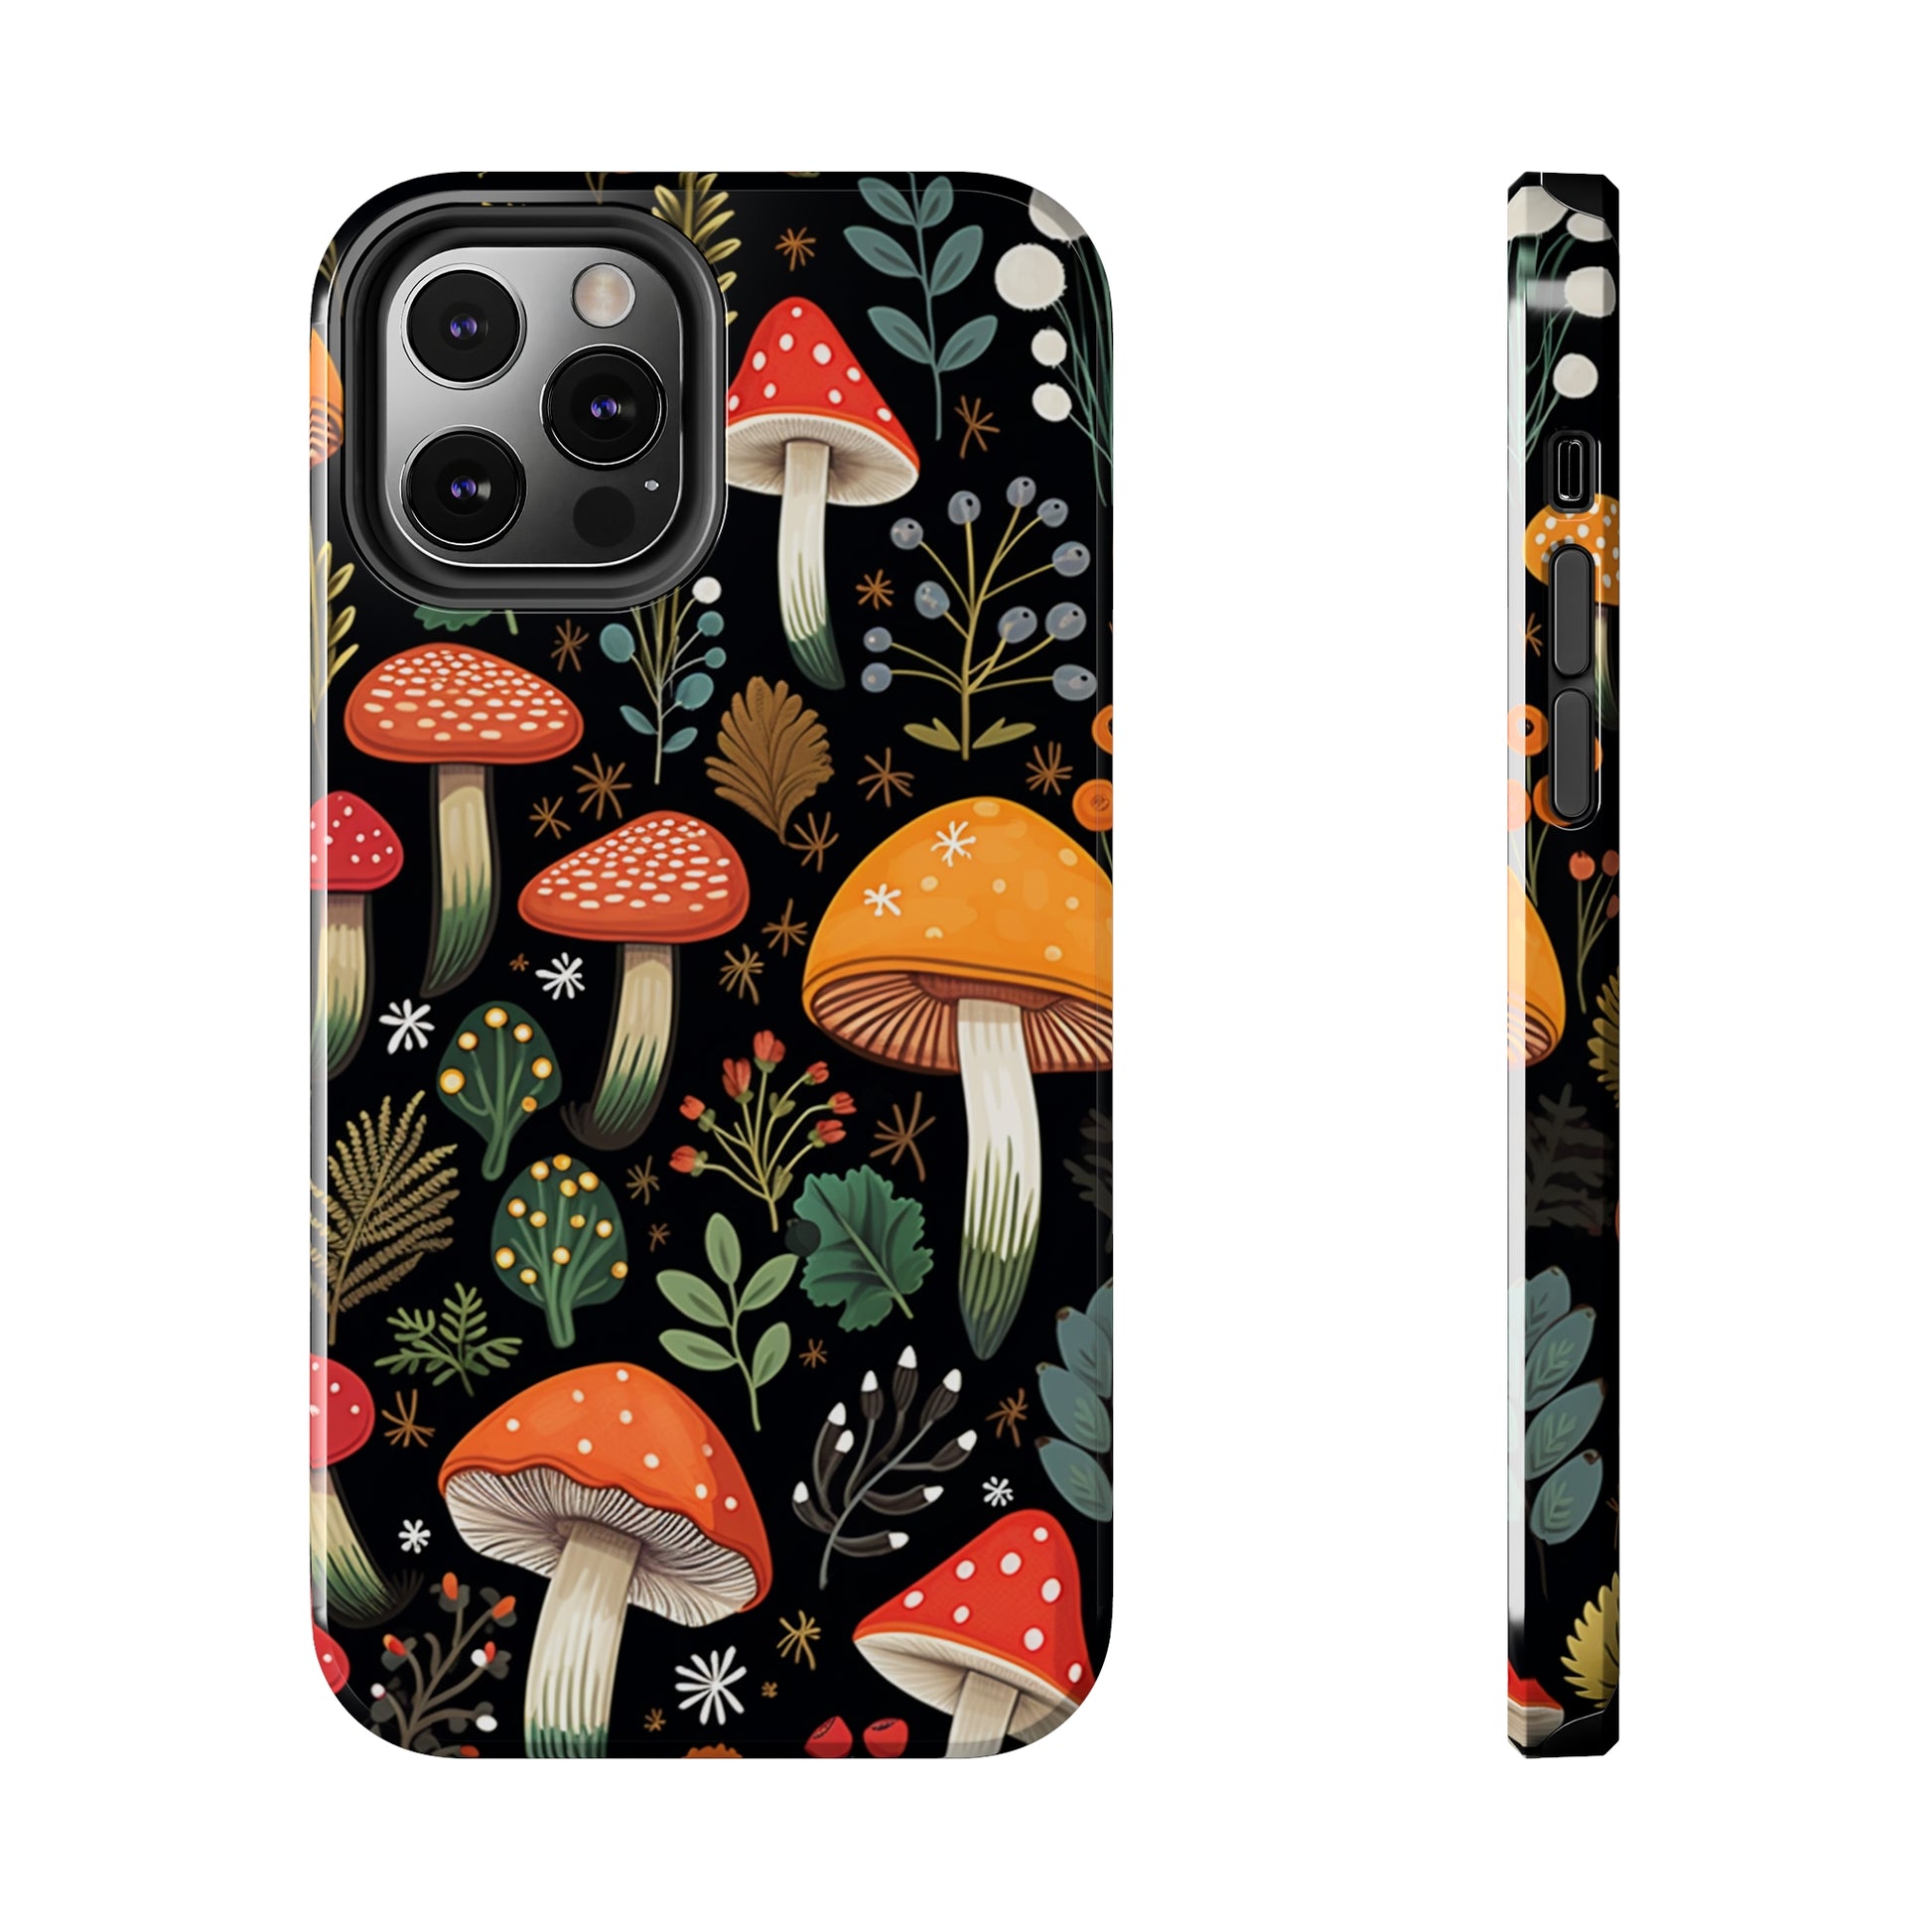 Psychedelic Art iPhone 12 Pro Max Case